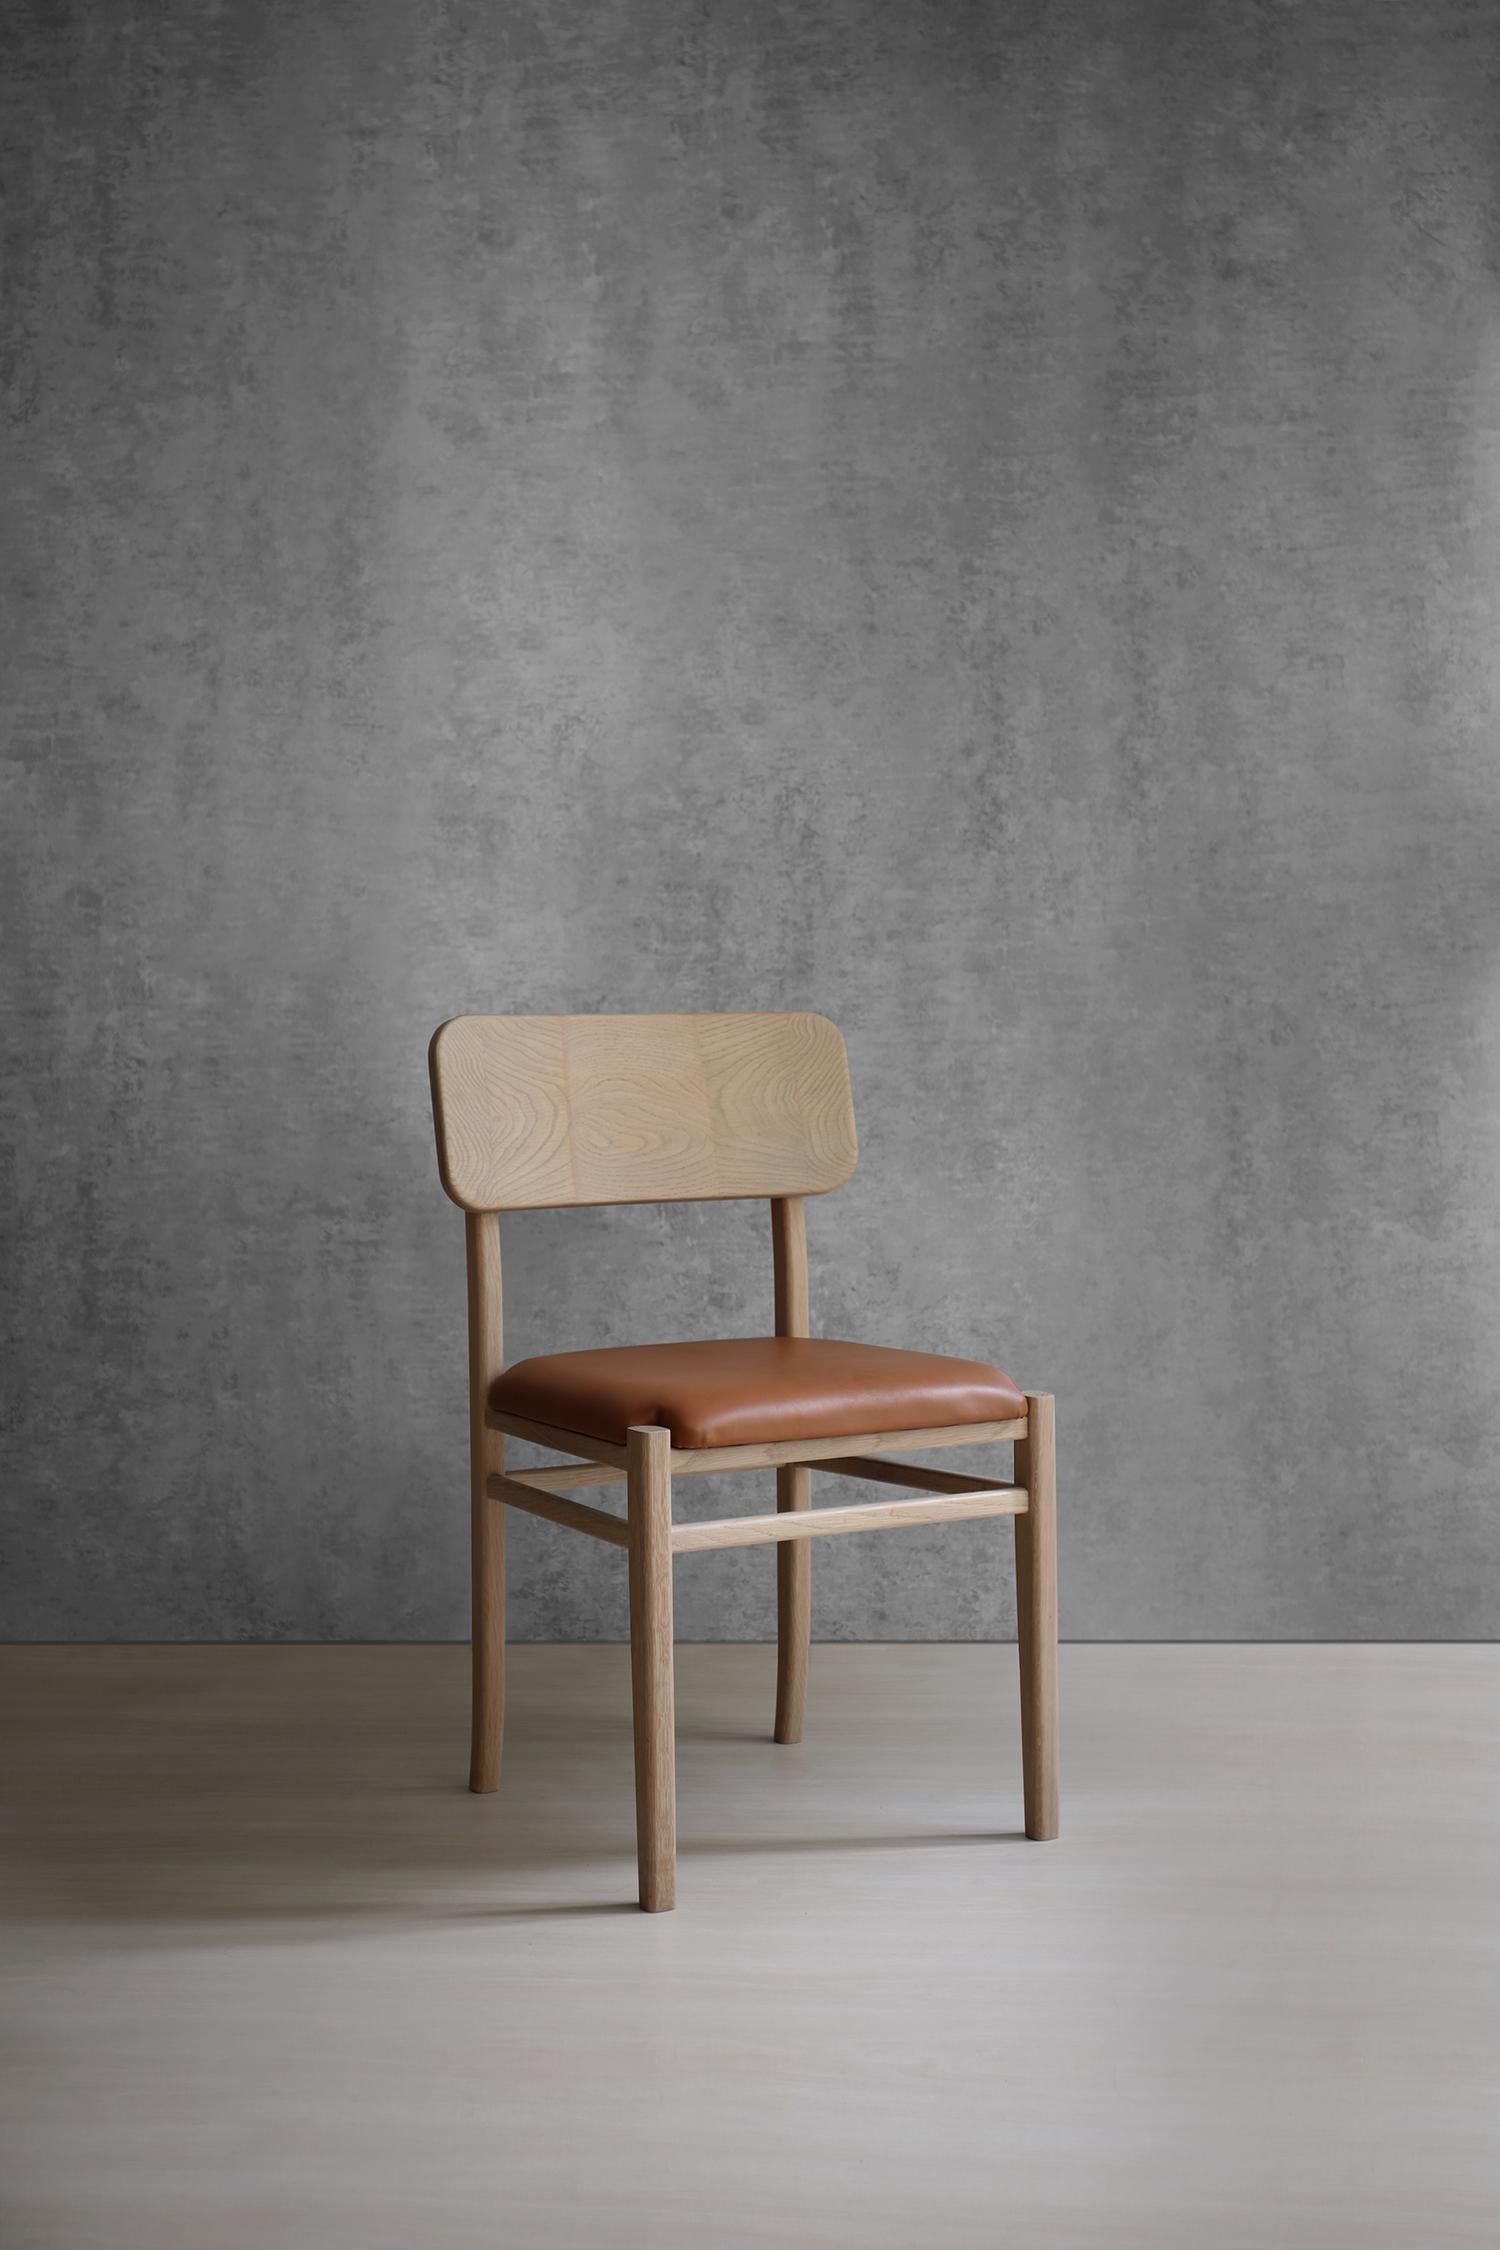 XI Onceava chair by Joel Escalona
Dimensions: D 50 x W 48 x H 84 cm
Materials: oak wood, leather.
Also available in black.

Chair made of white oak with leather.

Joel Escalona
He was born in Mexico City and studied Industrial Design at the